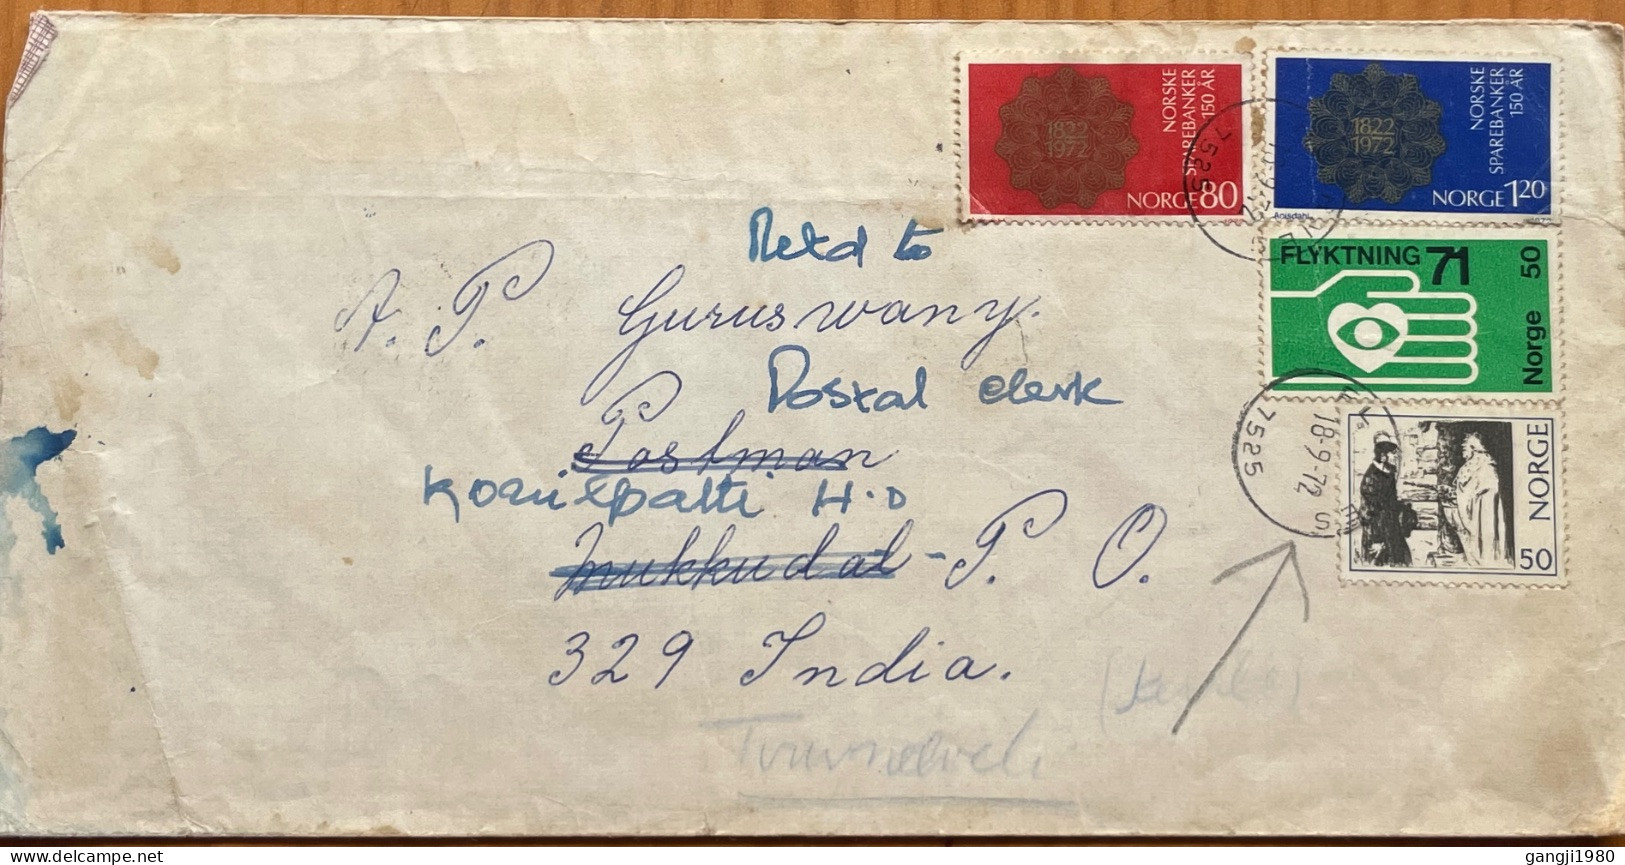 NORWAY TO INDIA1972, COVER POSTAL CODE INCLUDE, SAVING BANK, HELPING HAND, PREACHER & KING, FLOKENES, MUKKUDAL & KOATIP - Lettres & Documents